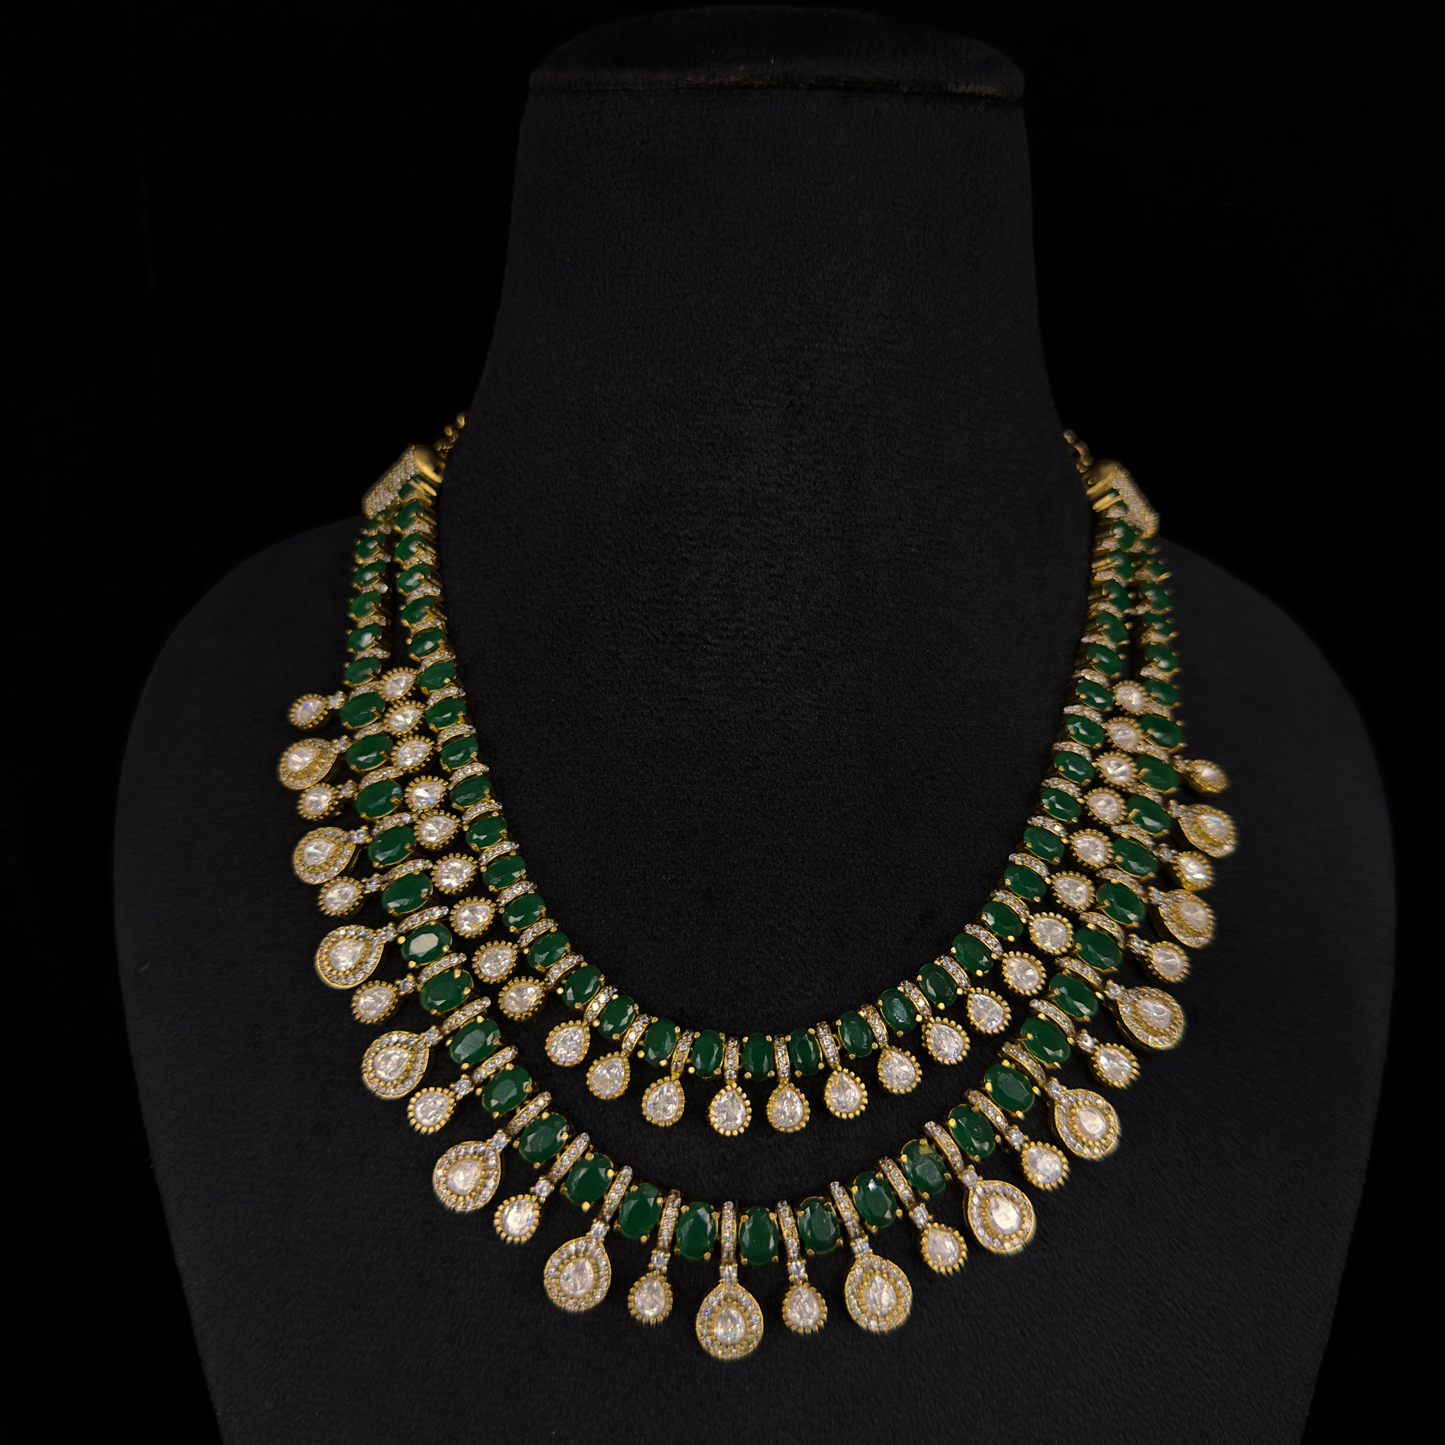 Gorgeous Two-Step Victorian Necklace with drop earrings